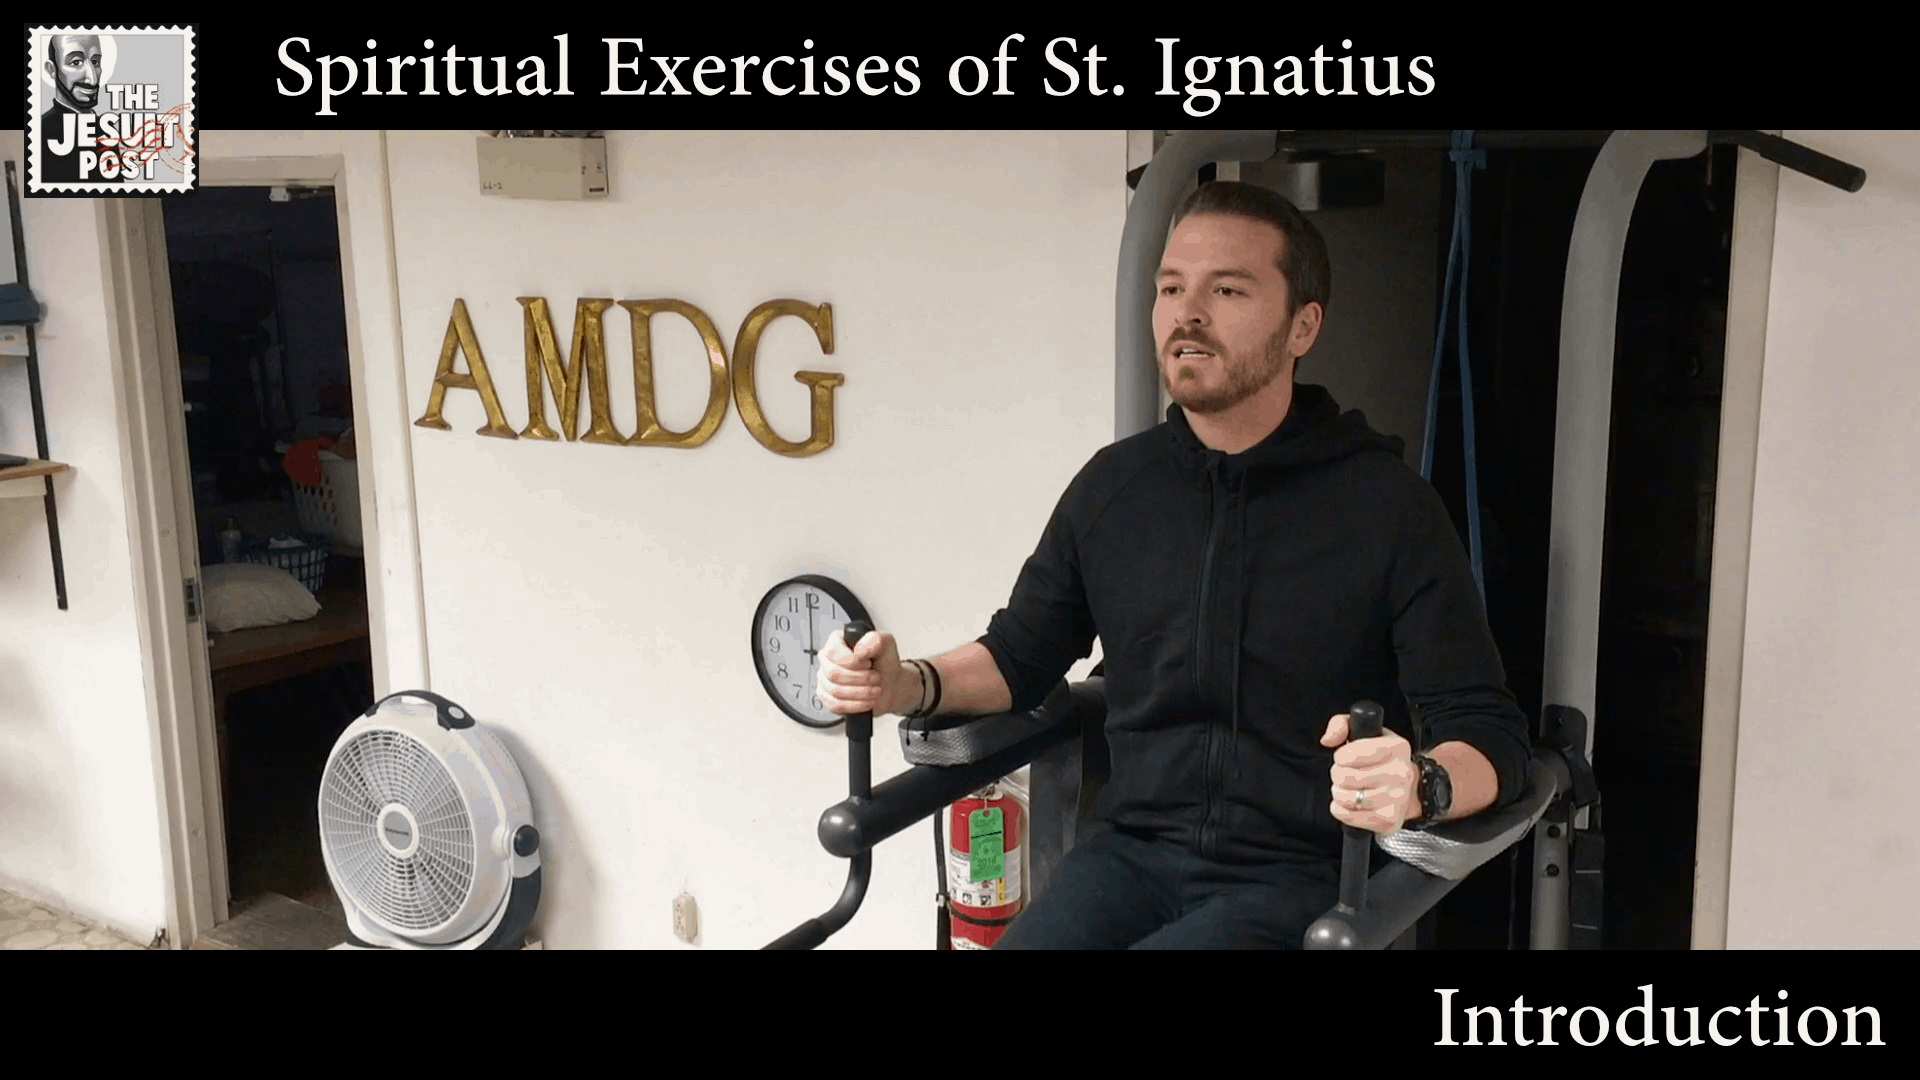 Quick Look at the Spiritual Exercises: Introduction